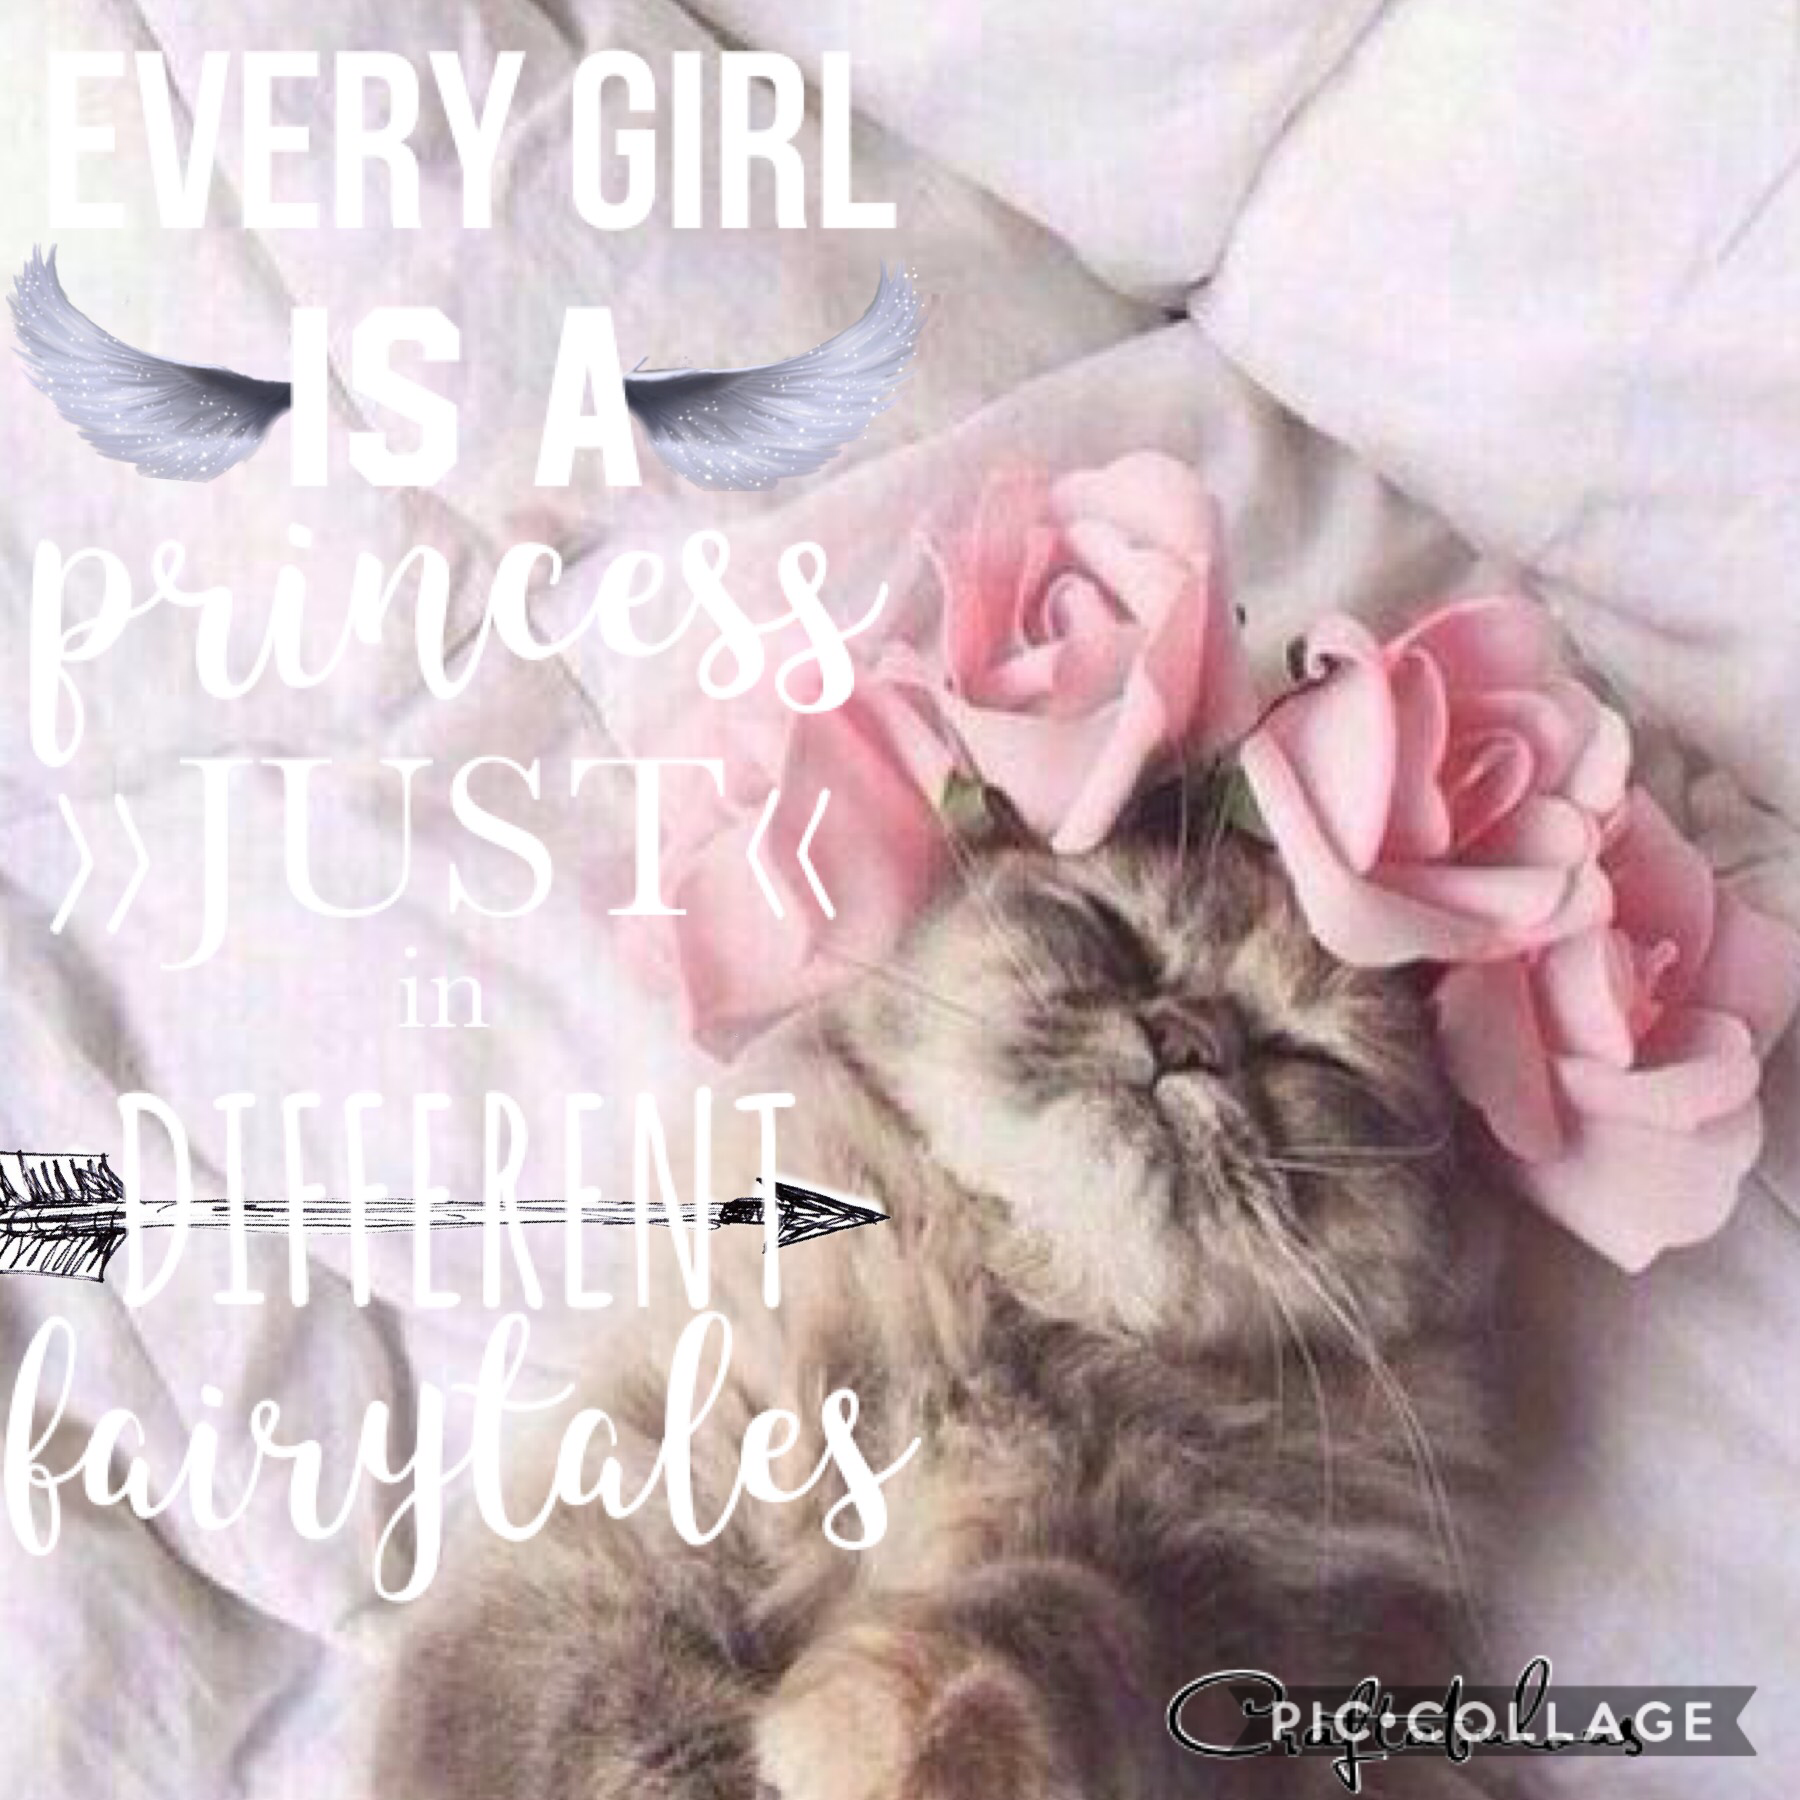 Purrincess!!! This looks purrtty trashy if you ask me, but that’s nothing new lol. oh well.